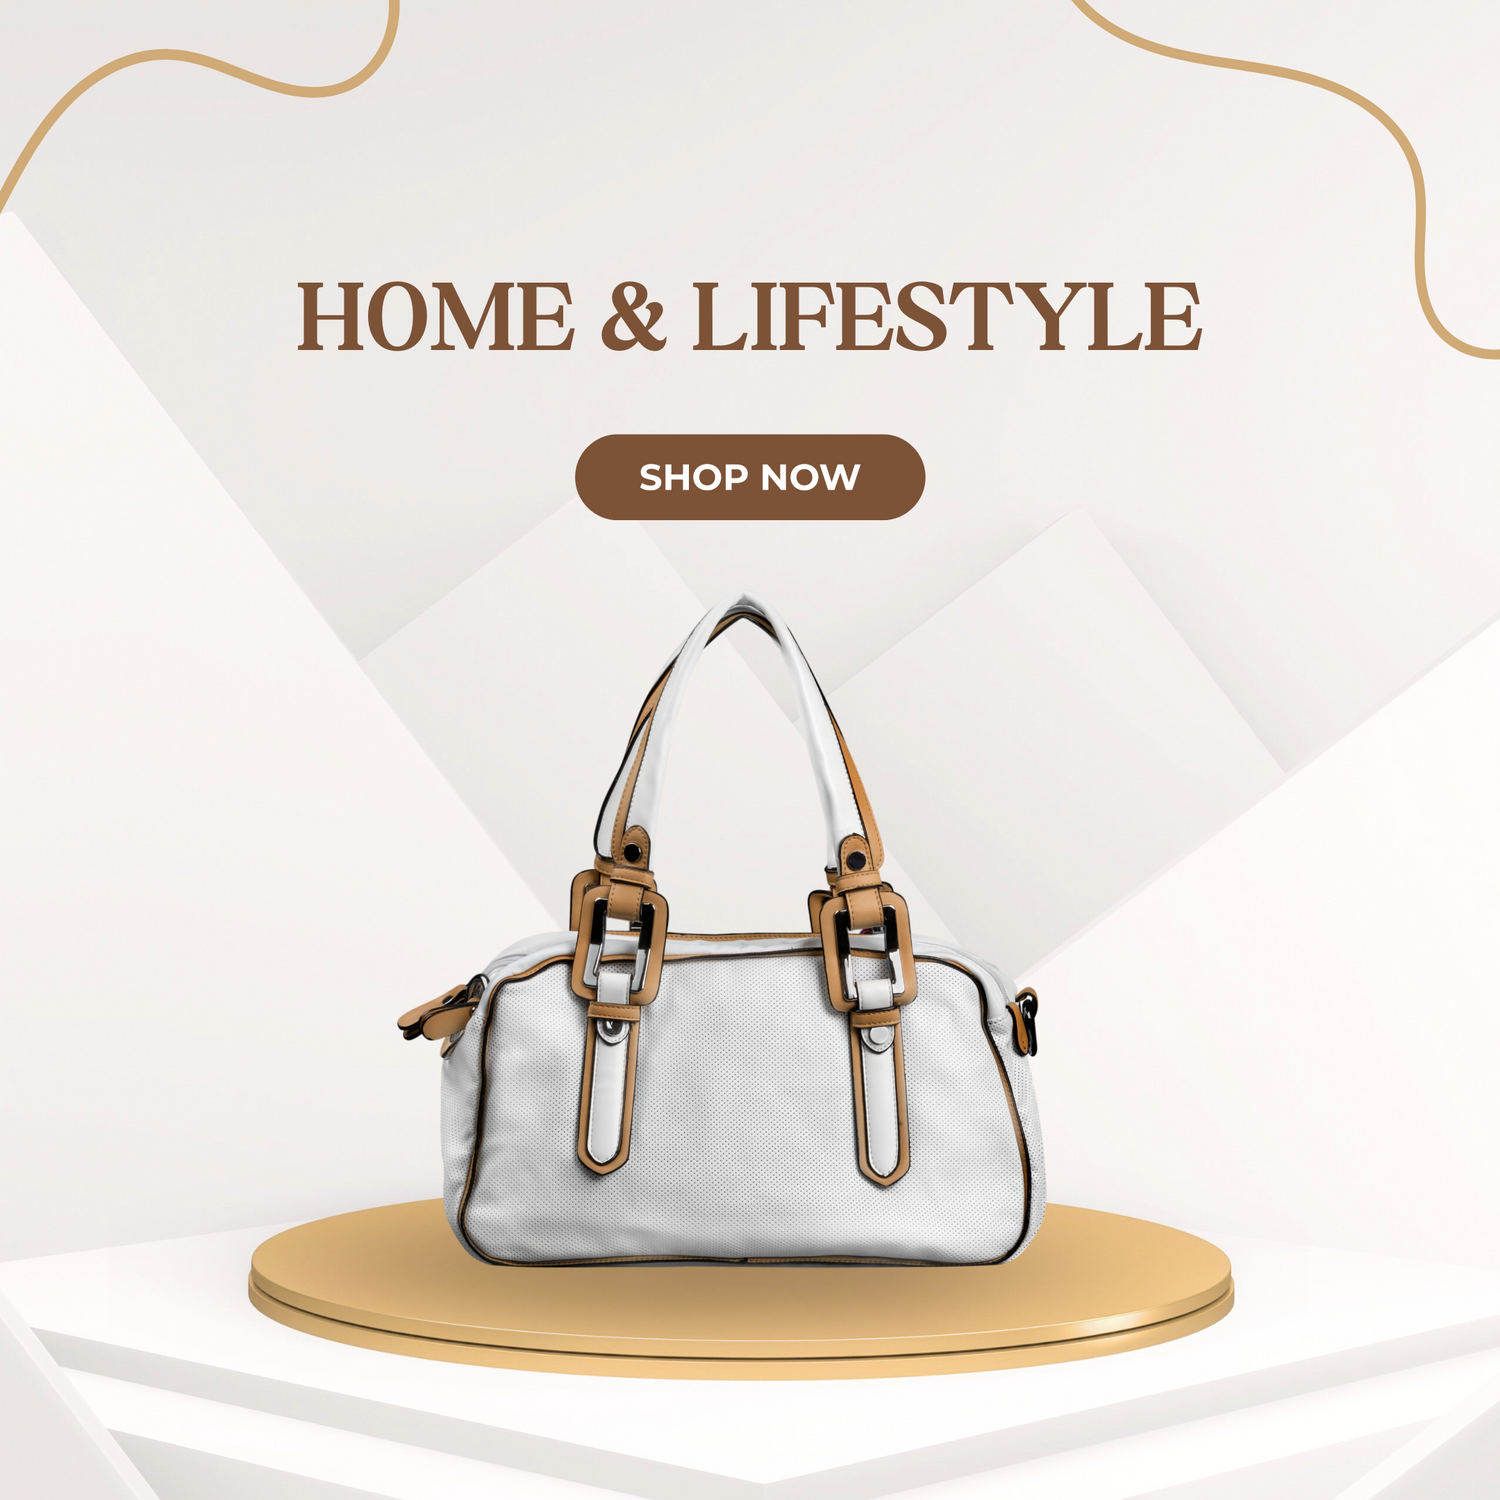 Home & Lifestyle Products